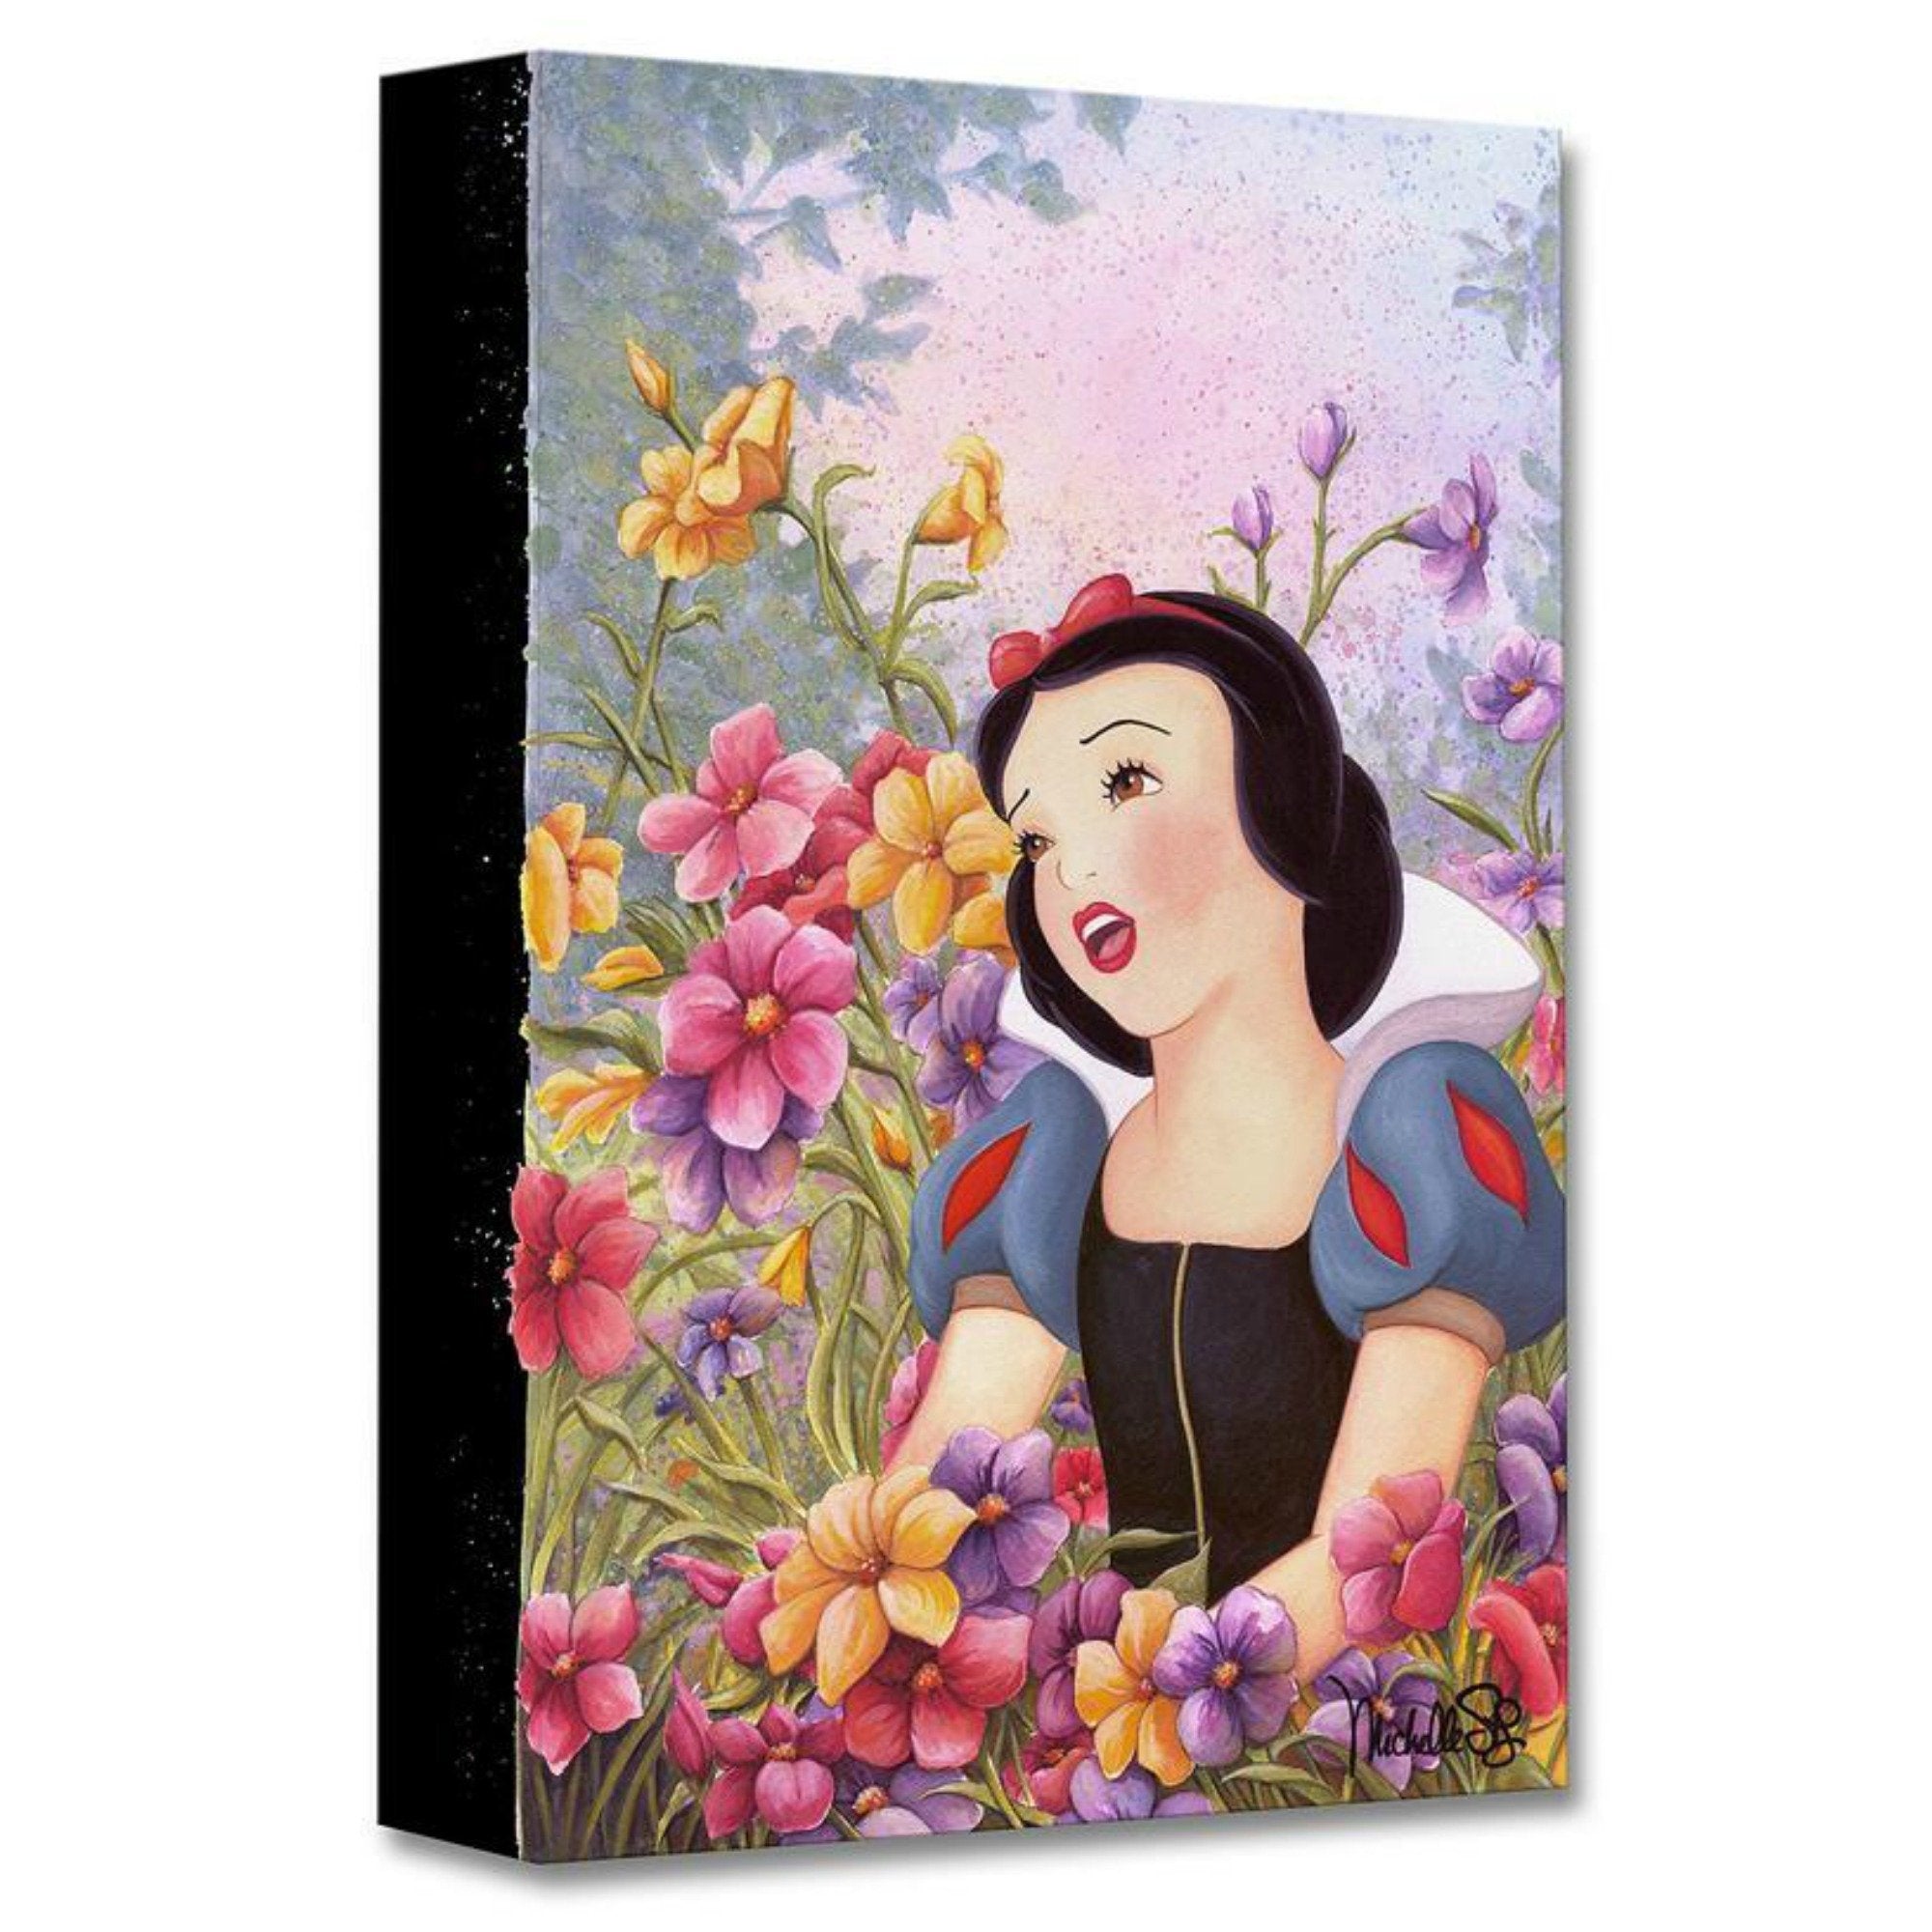 Love In Full Blossom by Michelle St. Laurent.  The beautiful Snow White singing her love songs in the garden of flowers.